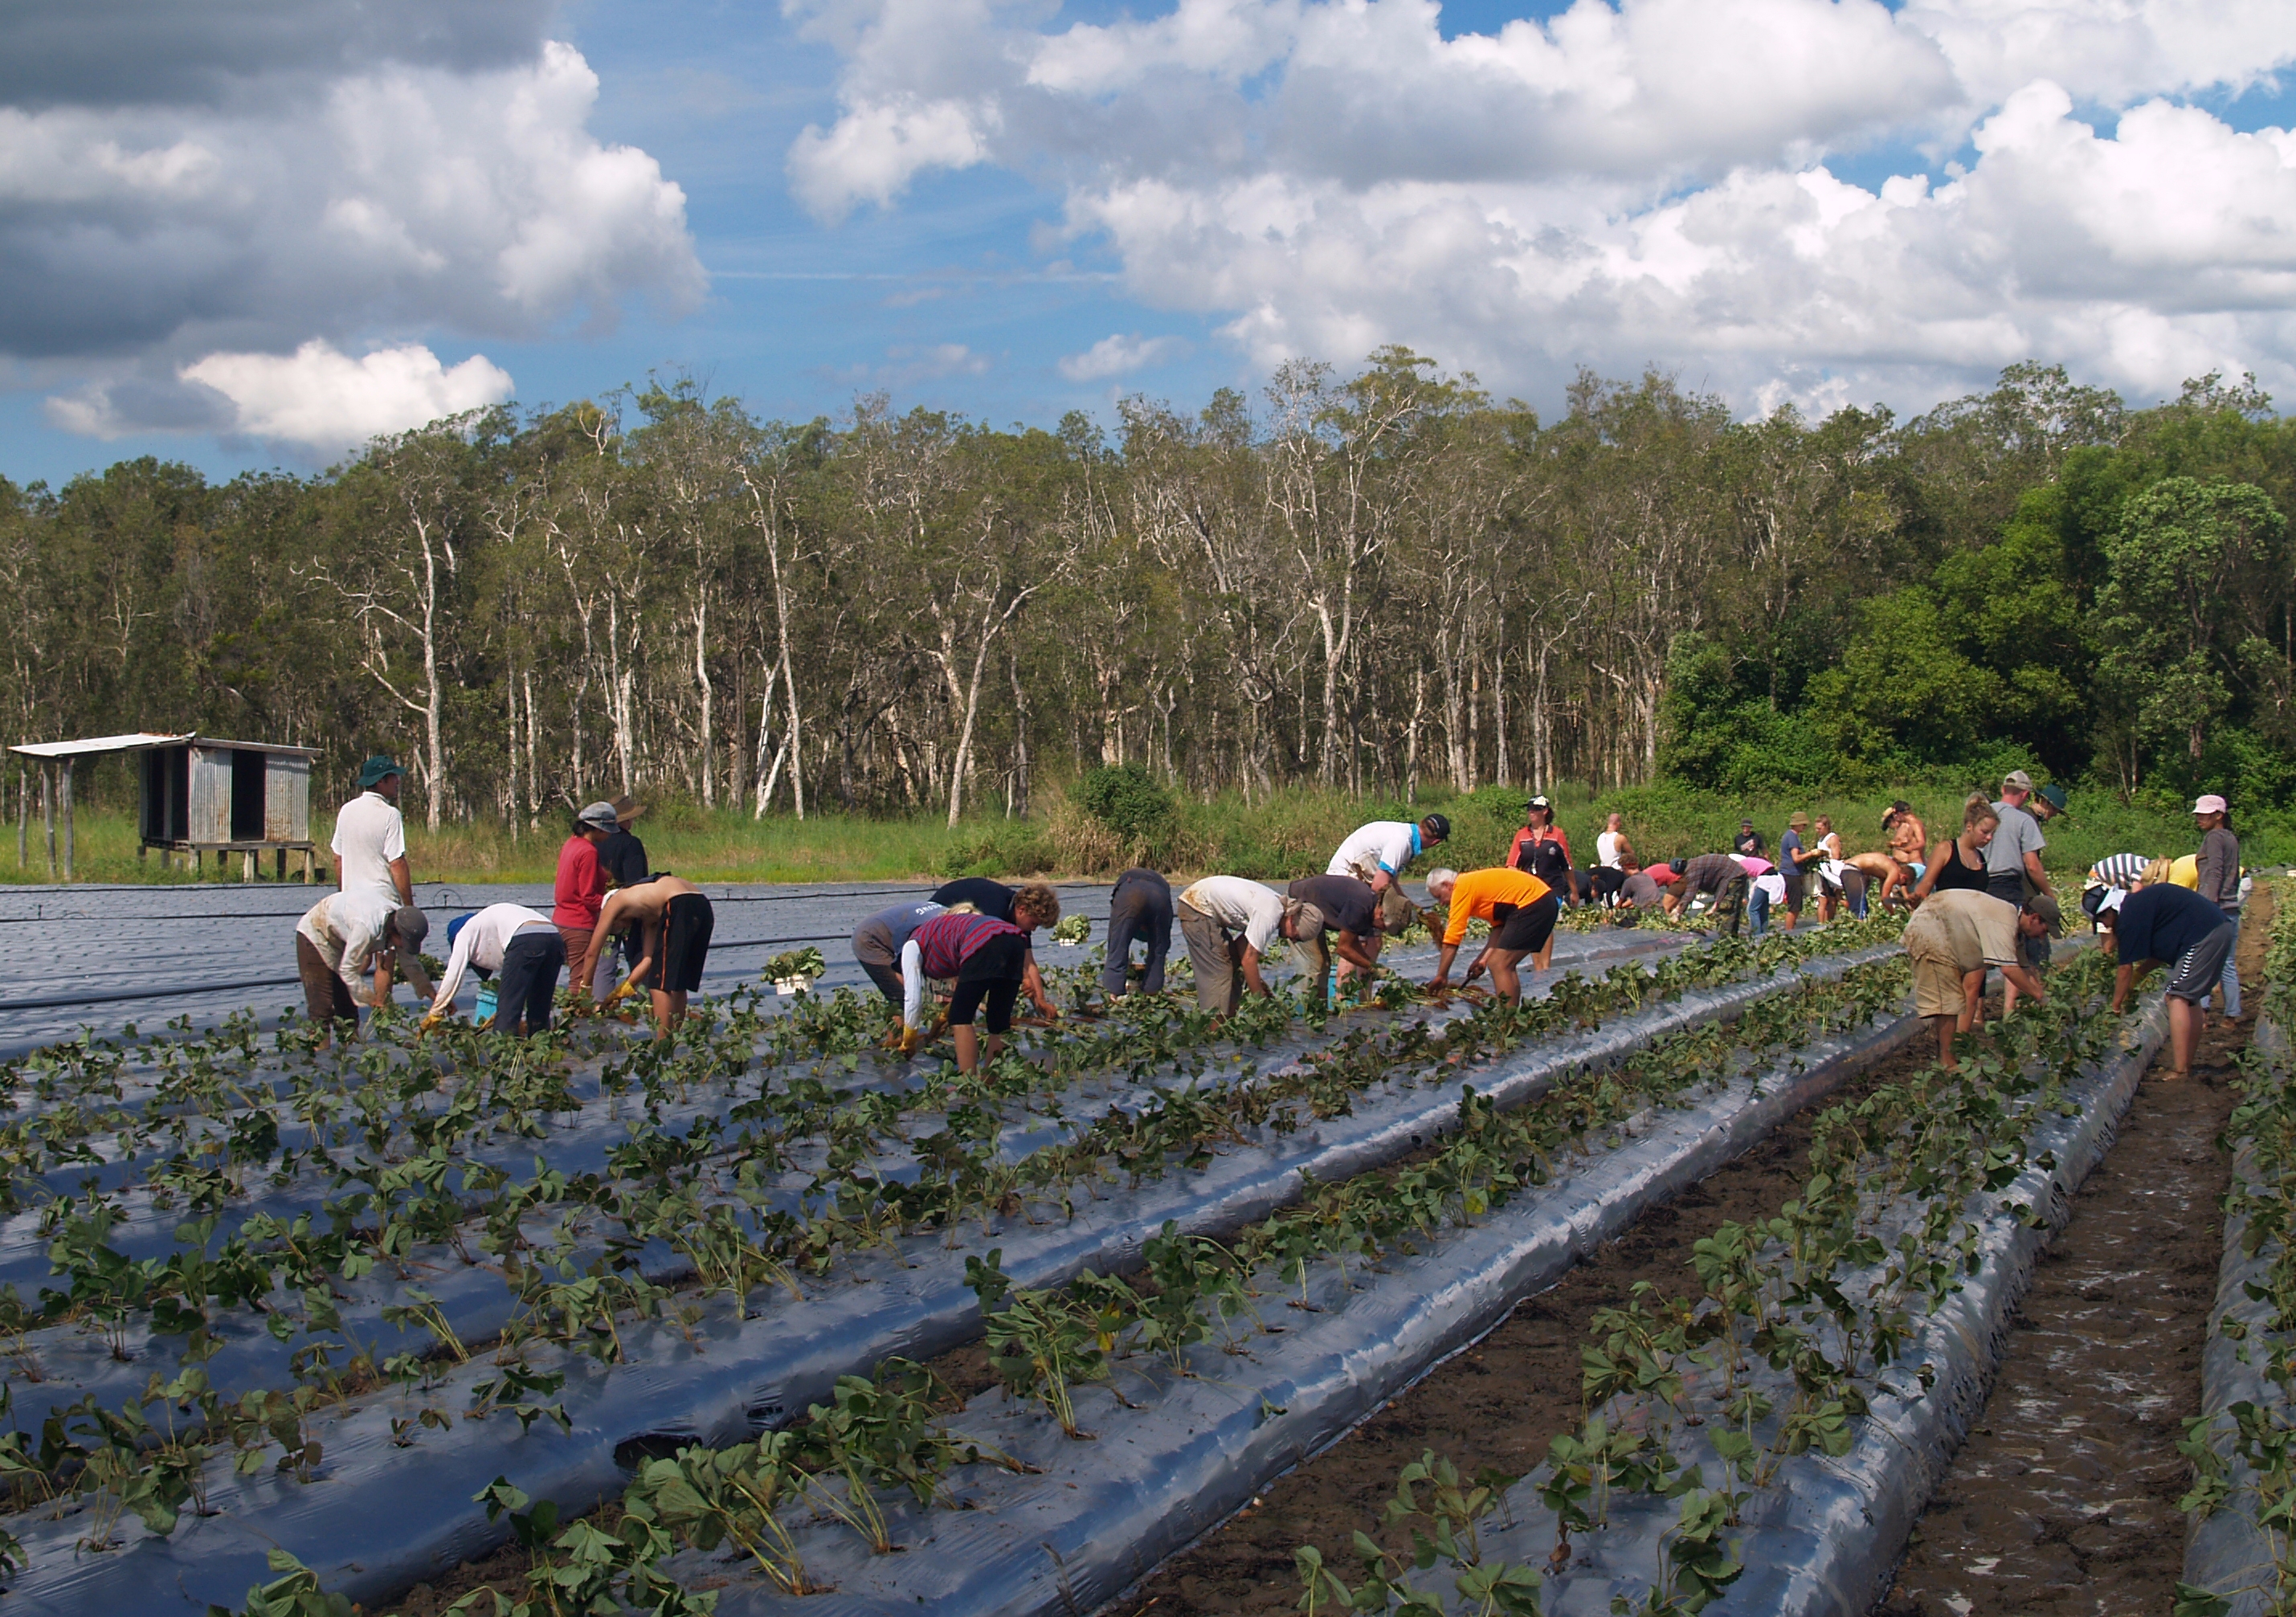 Fruit picking, like on this Queensland strawberry farm, is back-breaking work. Photo: Shutterstock